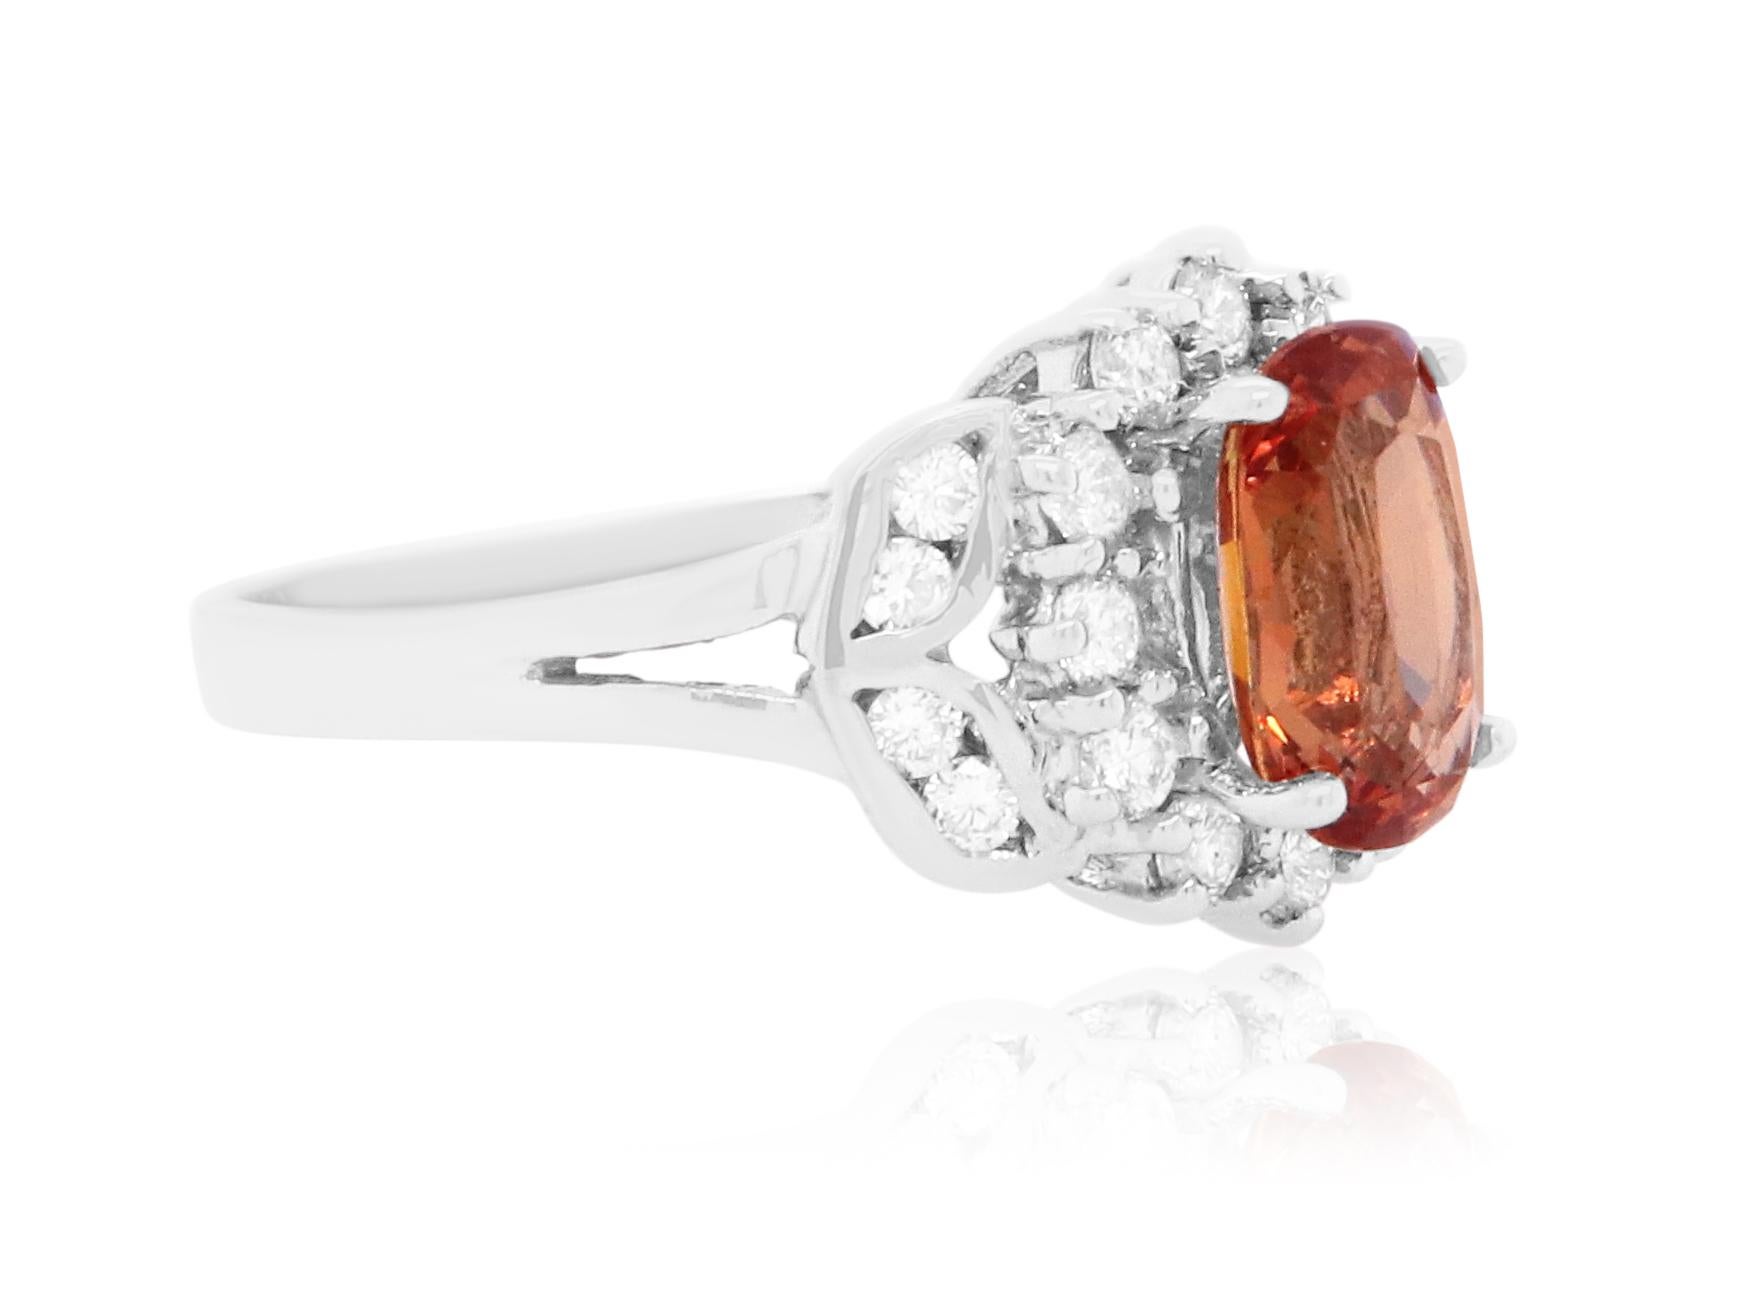 Material: 18K White Gold 
Center Stone Details: 1 Cushion Cut Padparadscha Sapphire at 1.86 Carats - Measuring at 8.49 x 5.65 x 3.81 mm
Diamond Details: 20 Brilliant Round White Diamonds at 0.46 Carats- Clarity: SI  / Color: H-I
Complimentary sizing